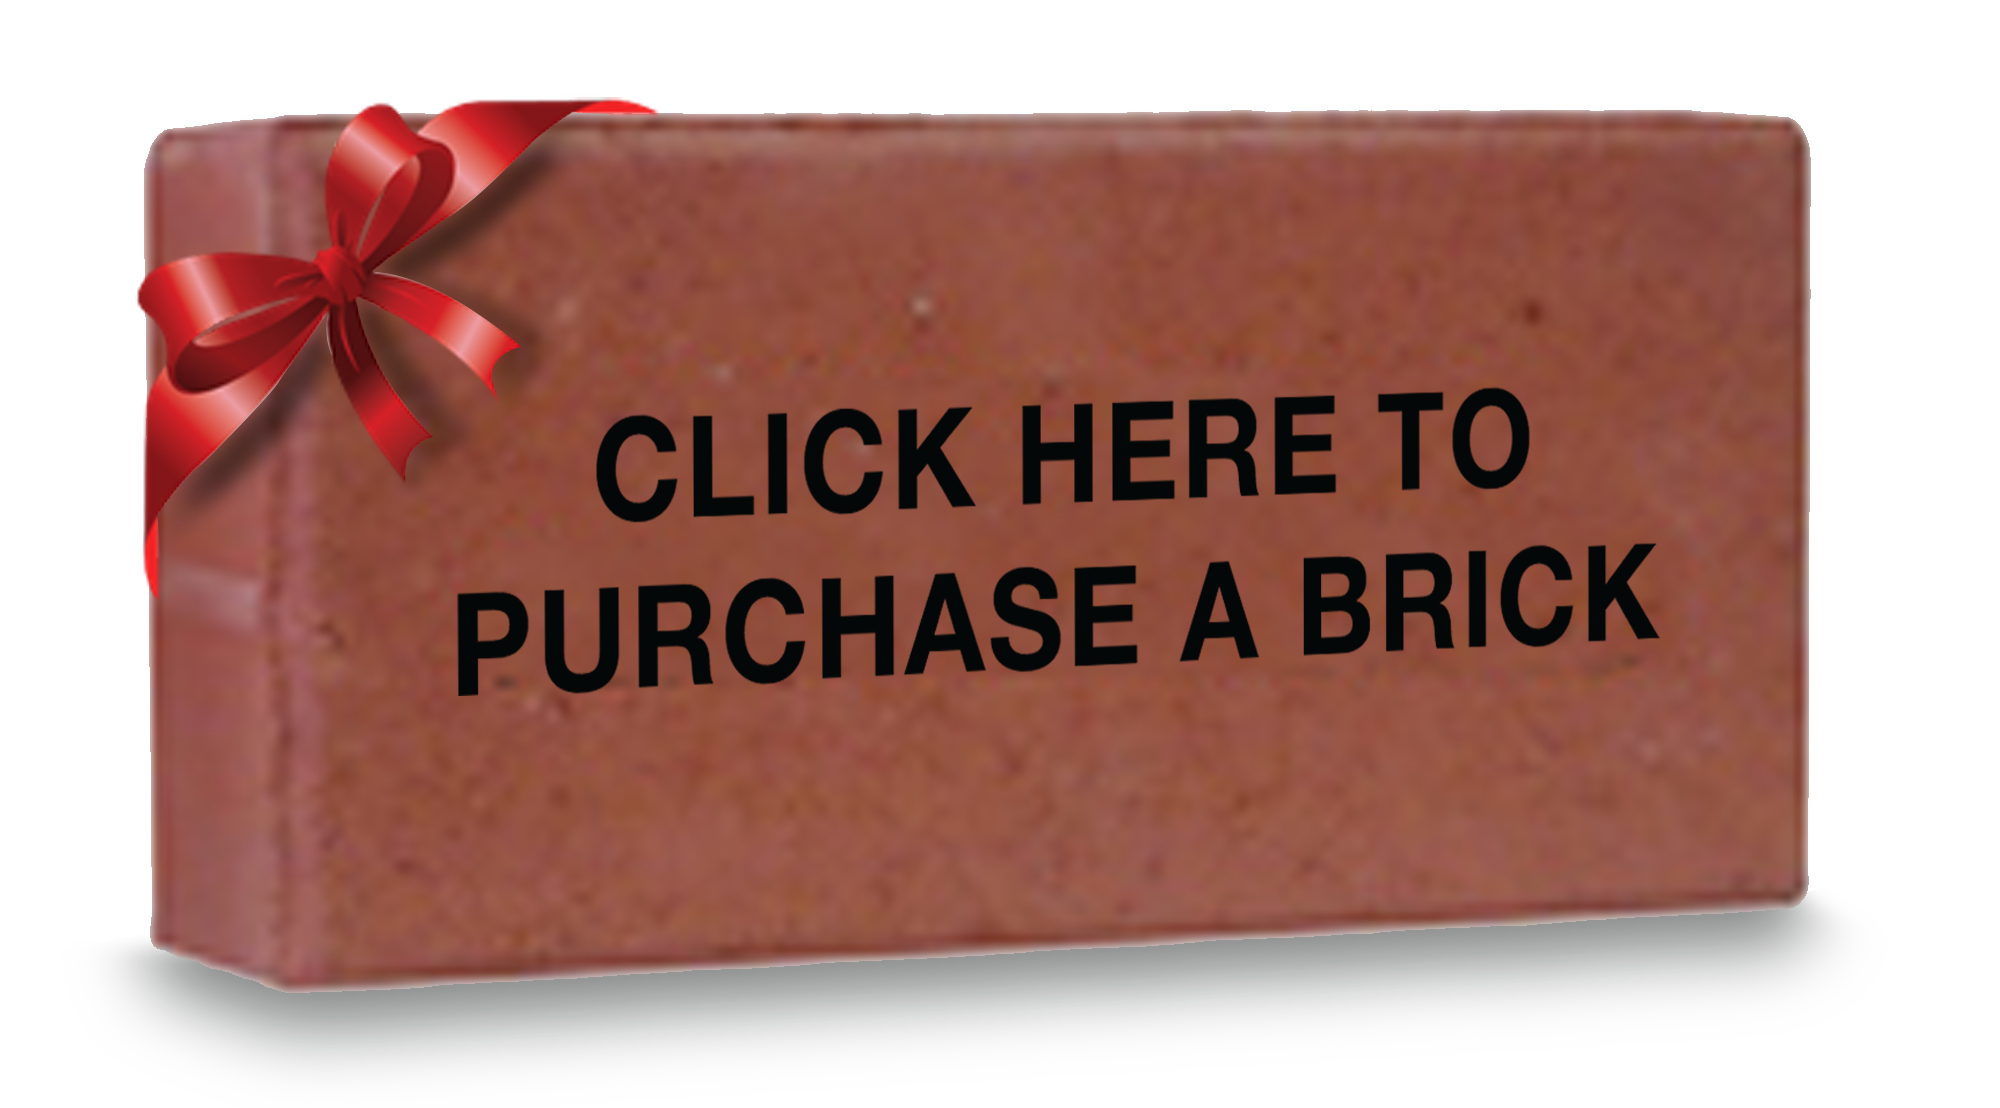 Image of a brick linked to online purchase site